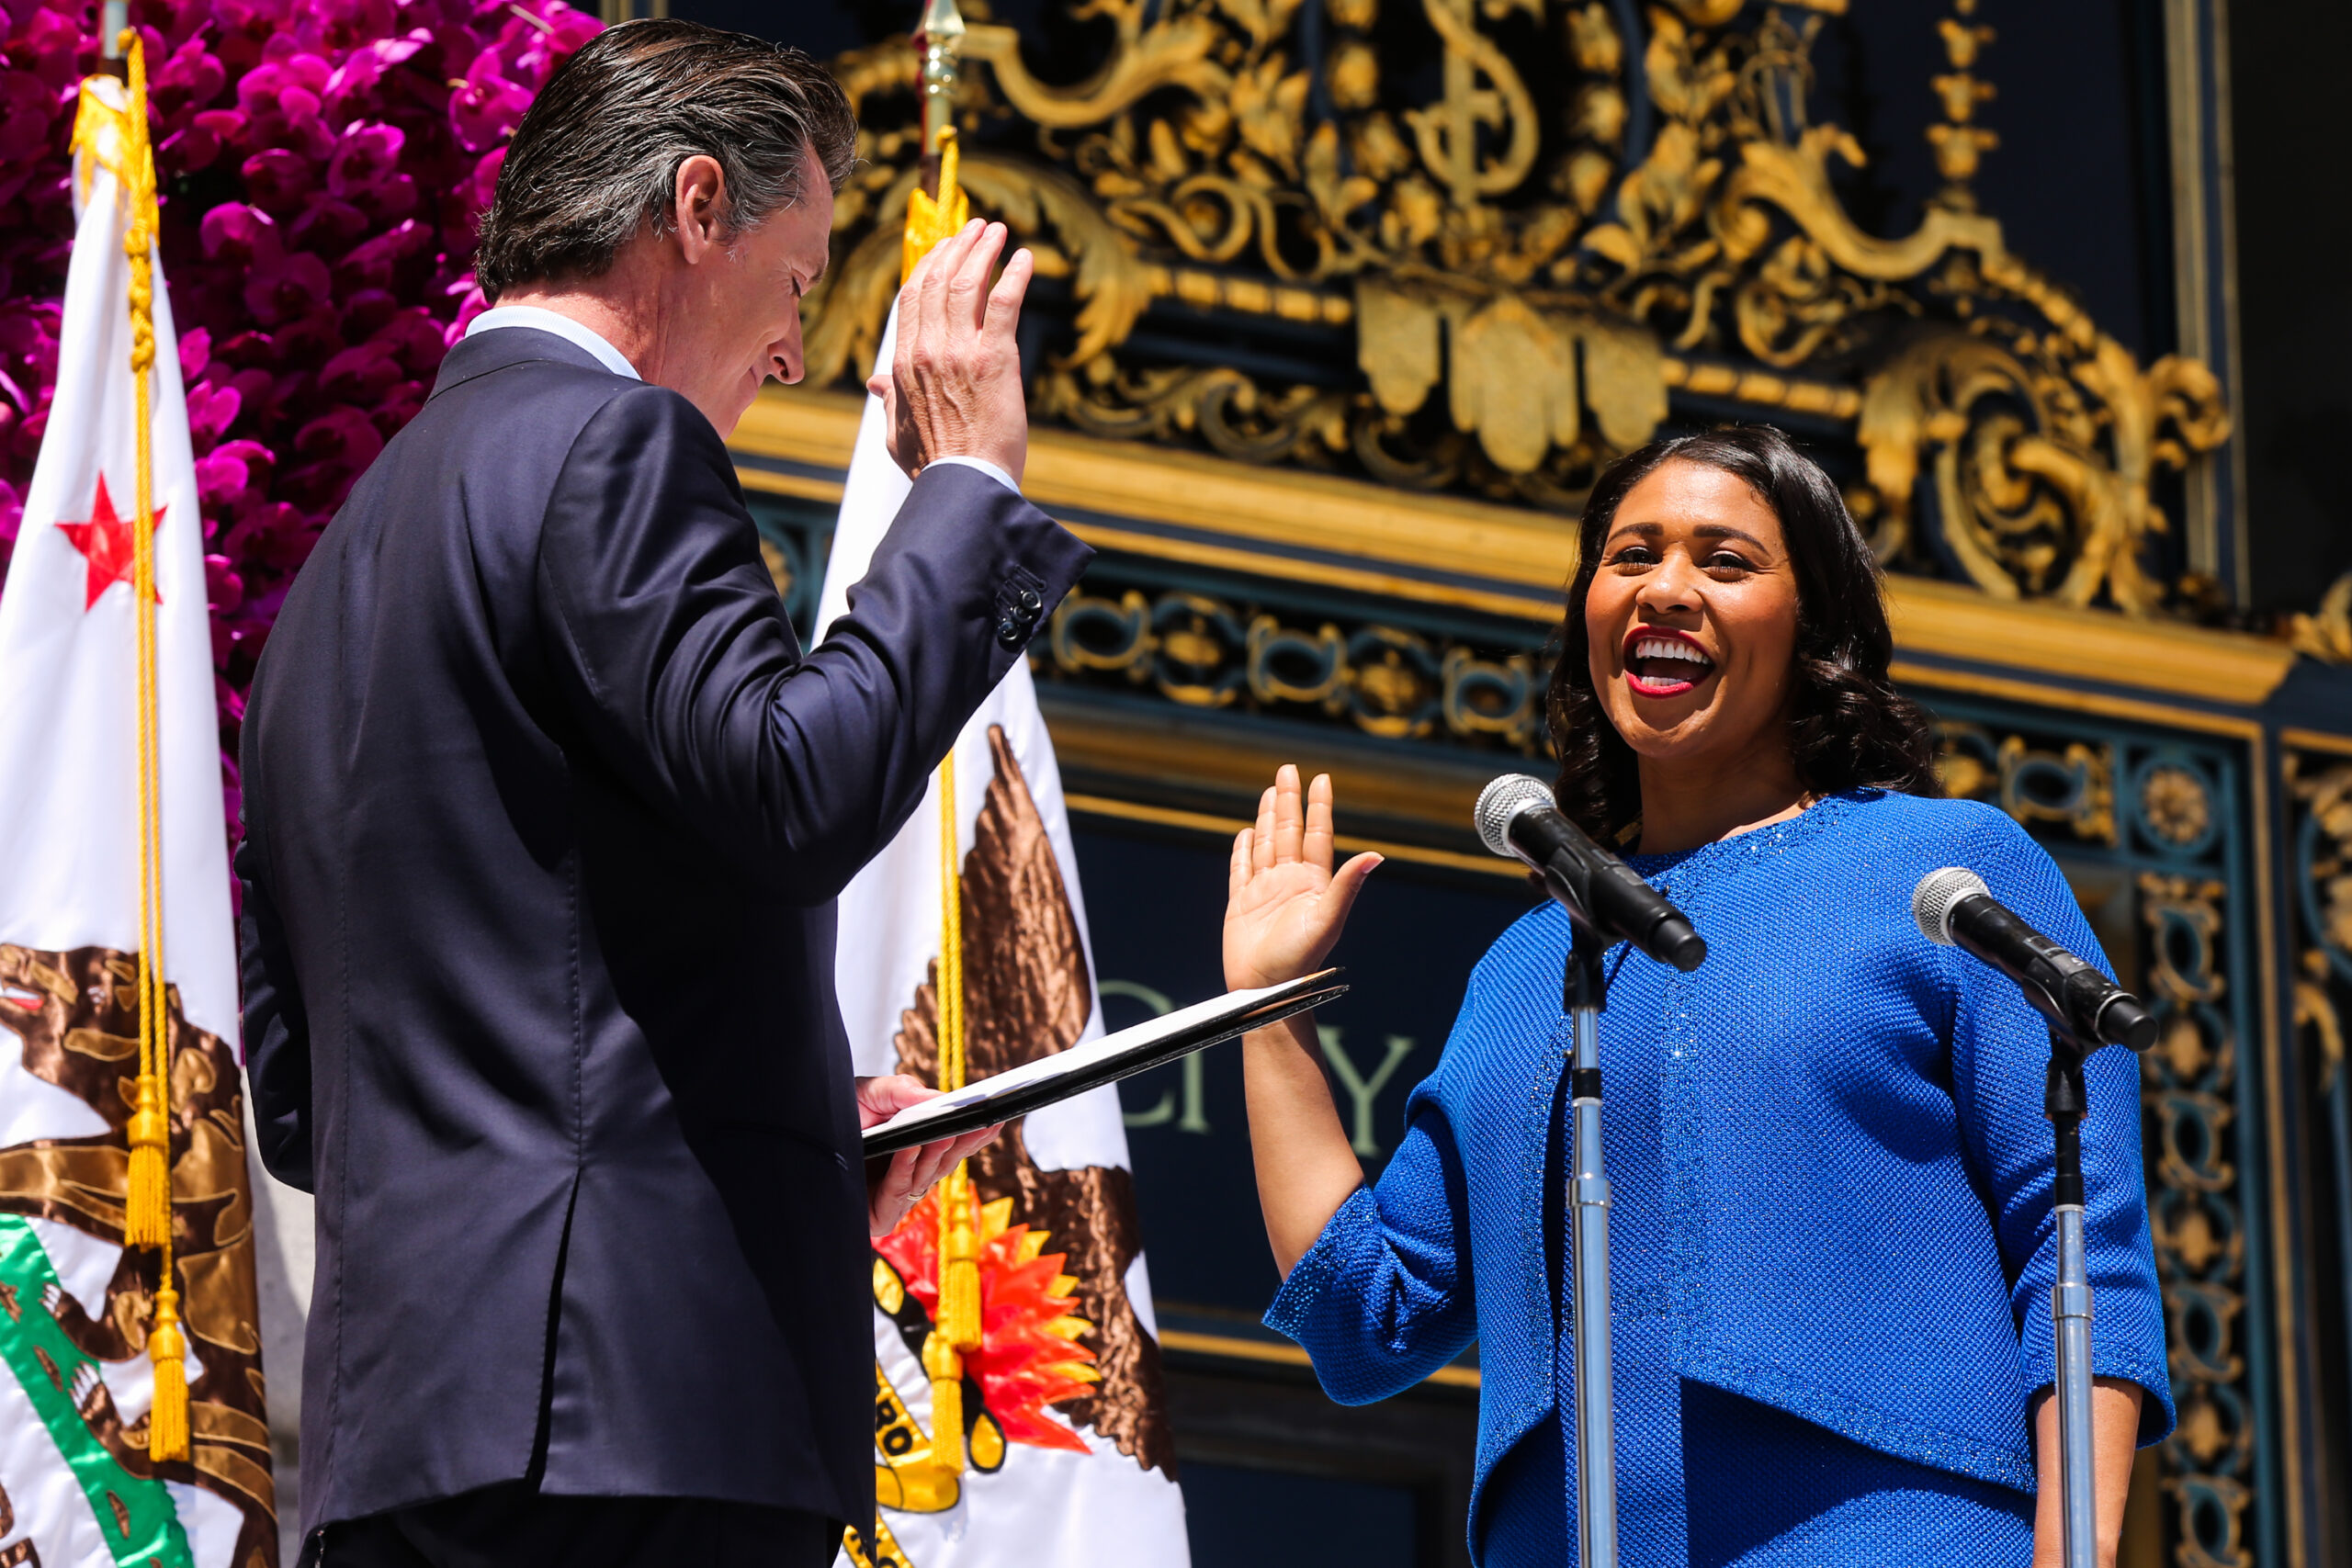 Photo gallery: Mayor London Breed’s rise to power